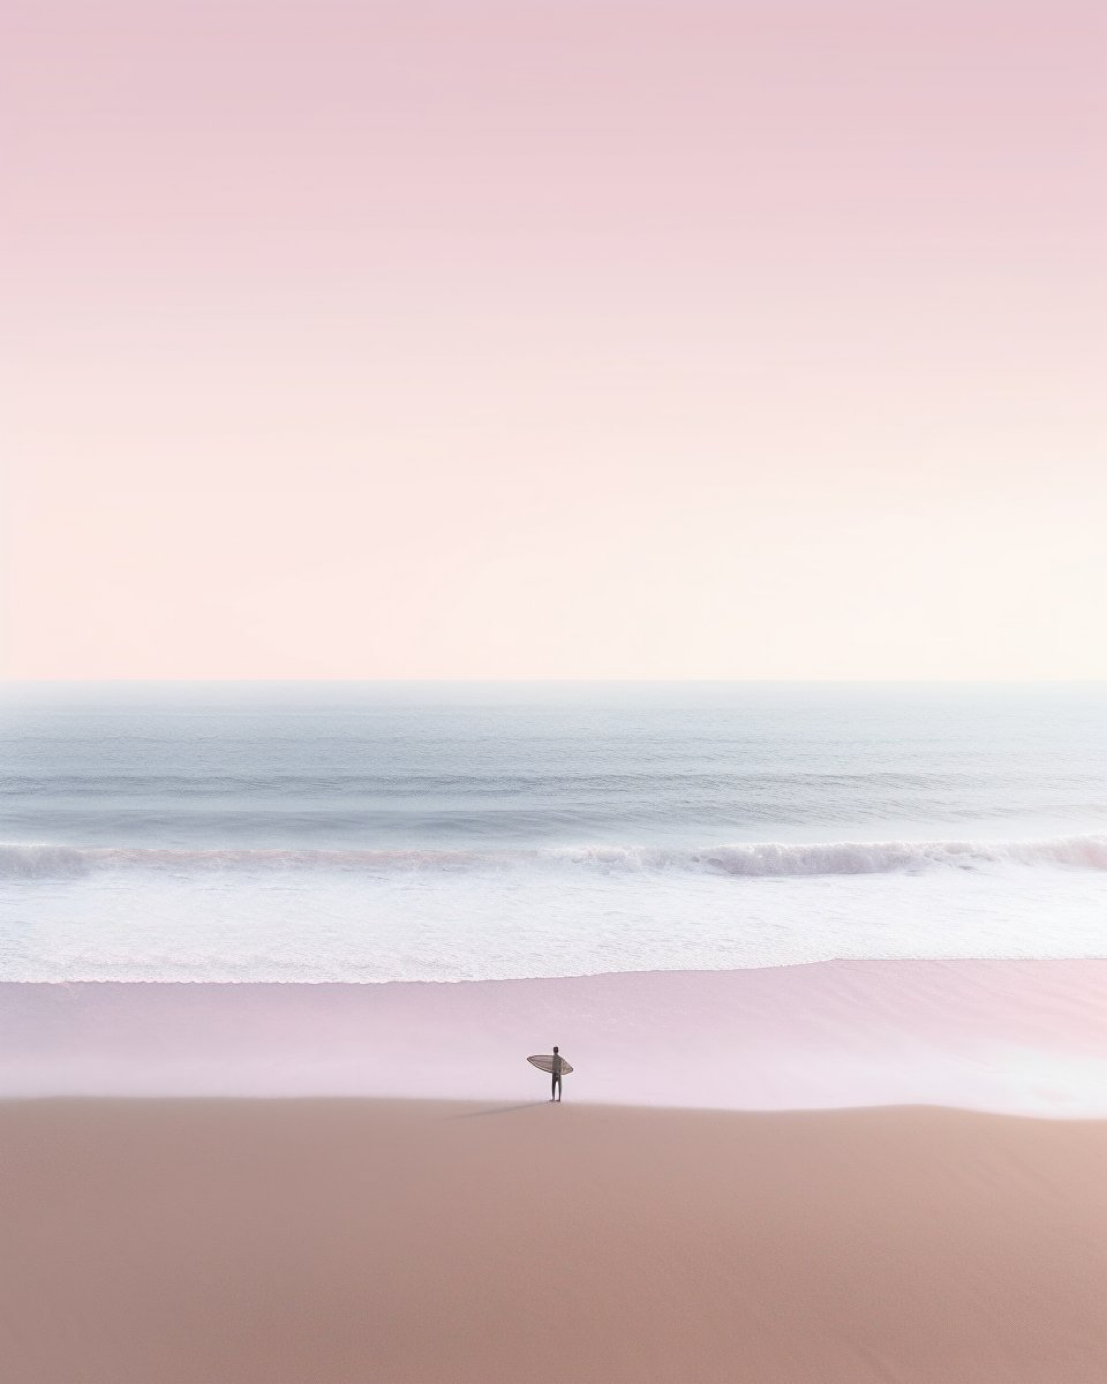 cinematic shot of distant surfer watching waves from beach, empty beach, minimalism, soft pink --ar 4:5